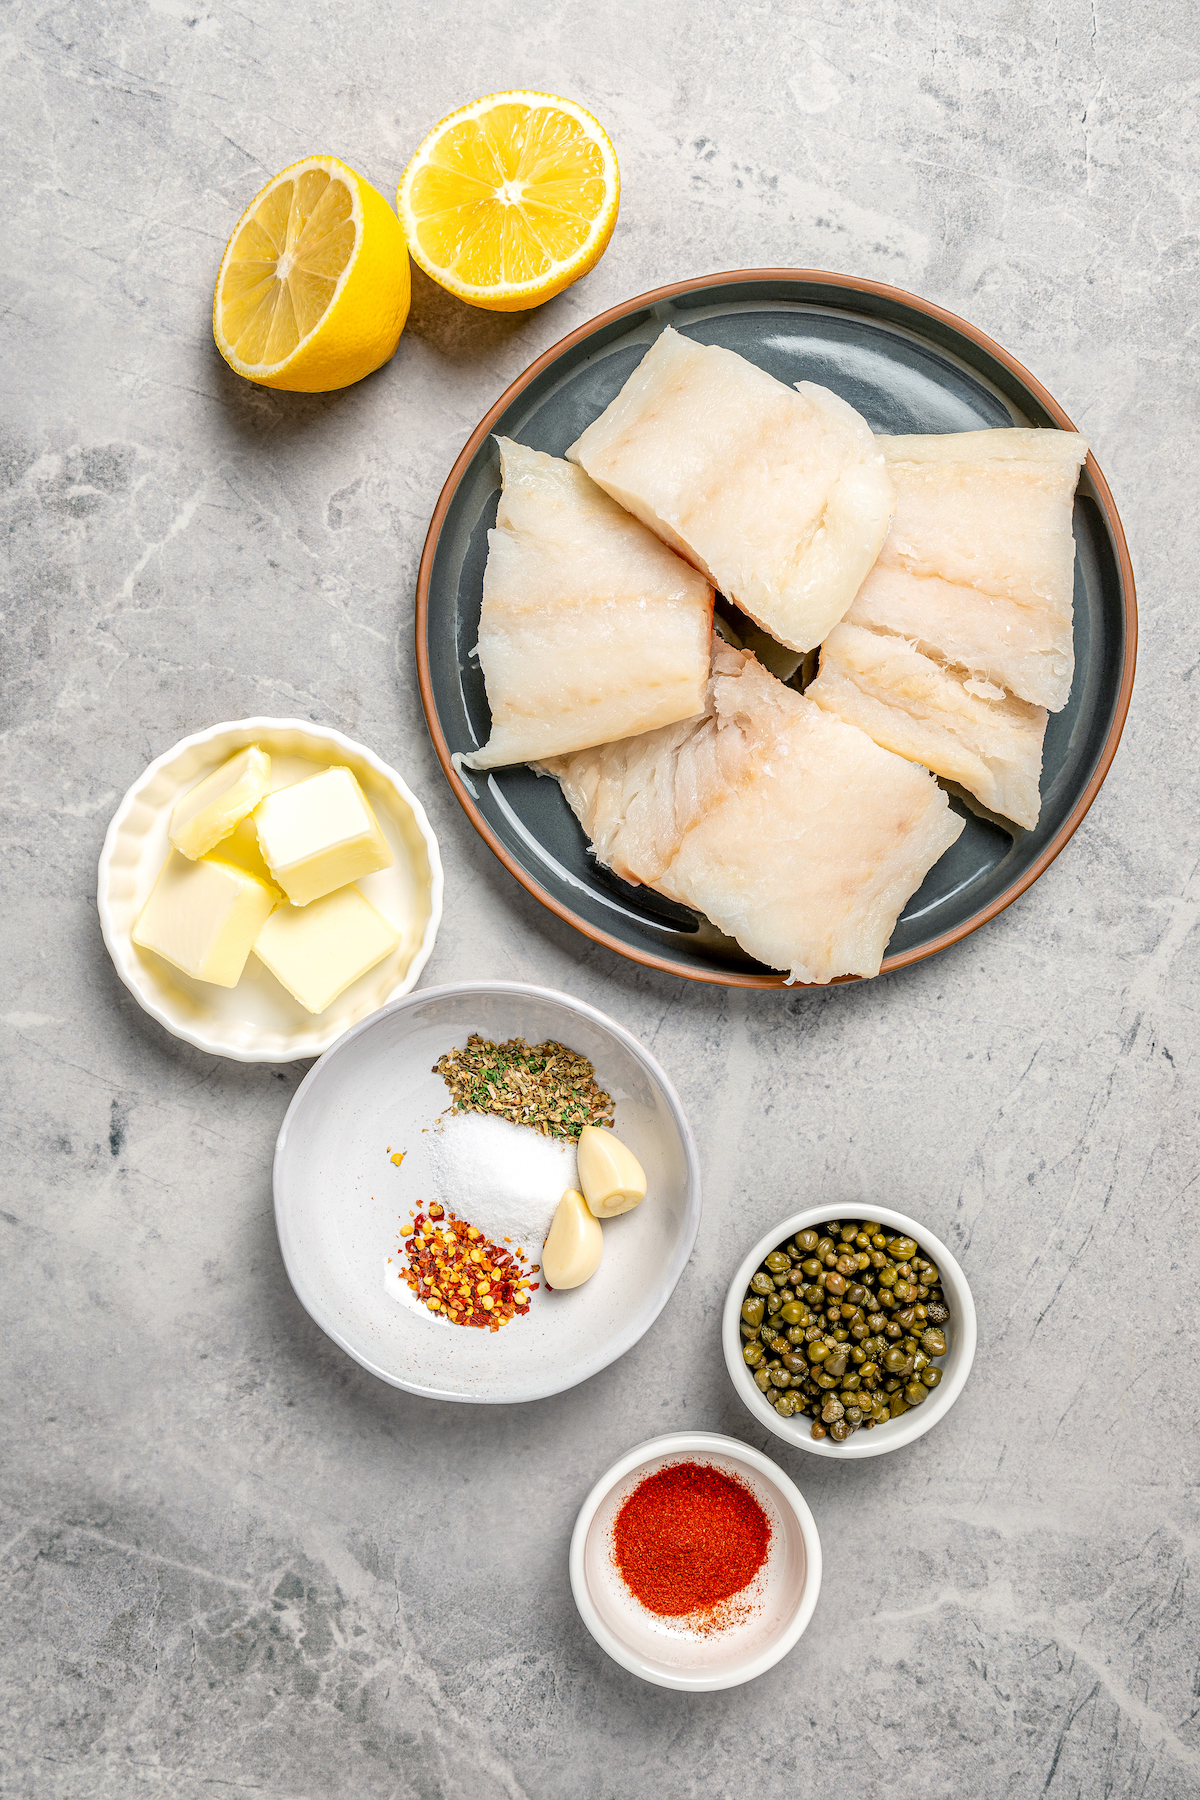 Ingredients for a simple baked cod recipe, measured and arranged on a table.